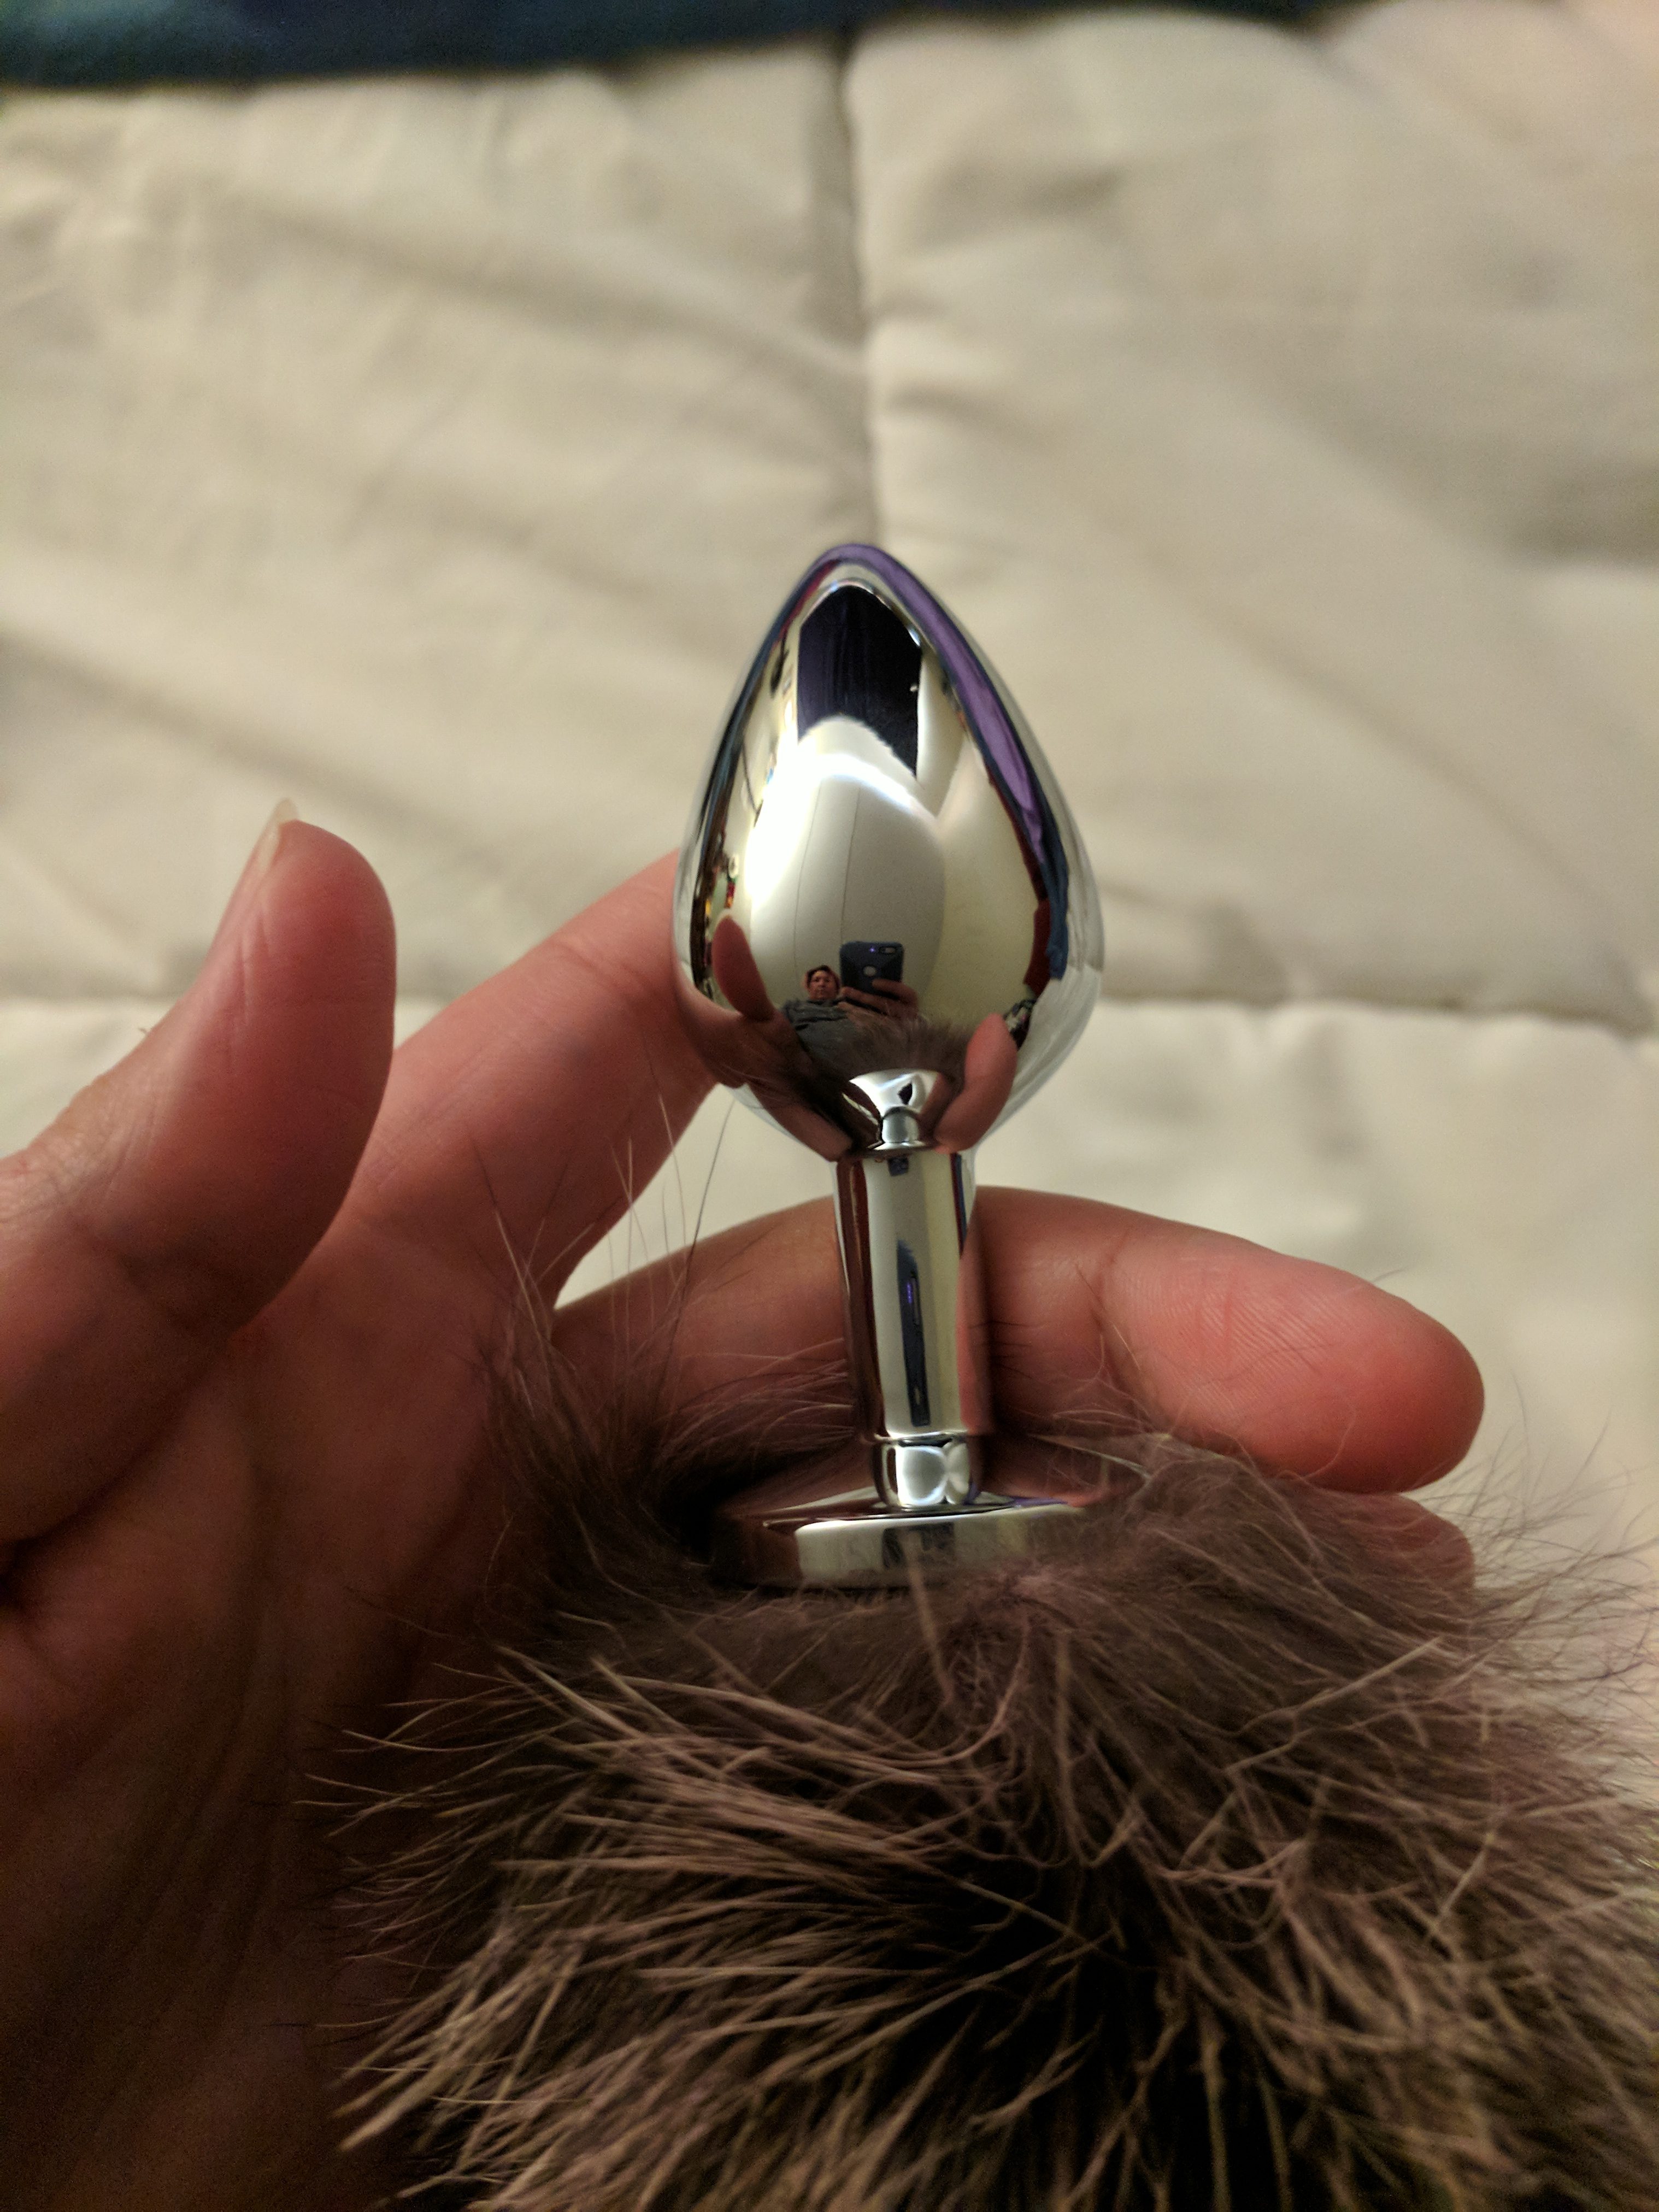 Stainless steel plug in hand, showing shape and size